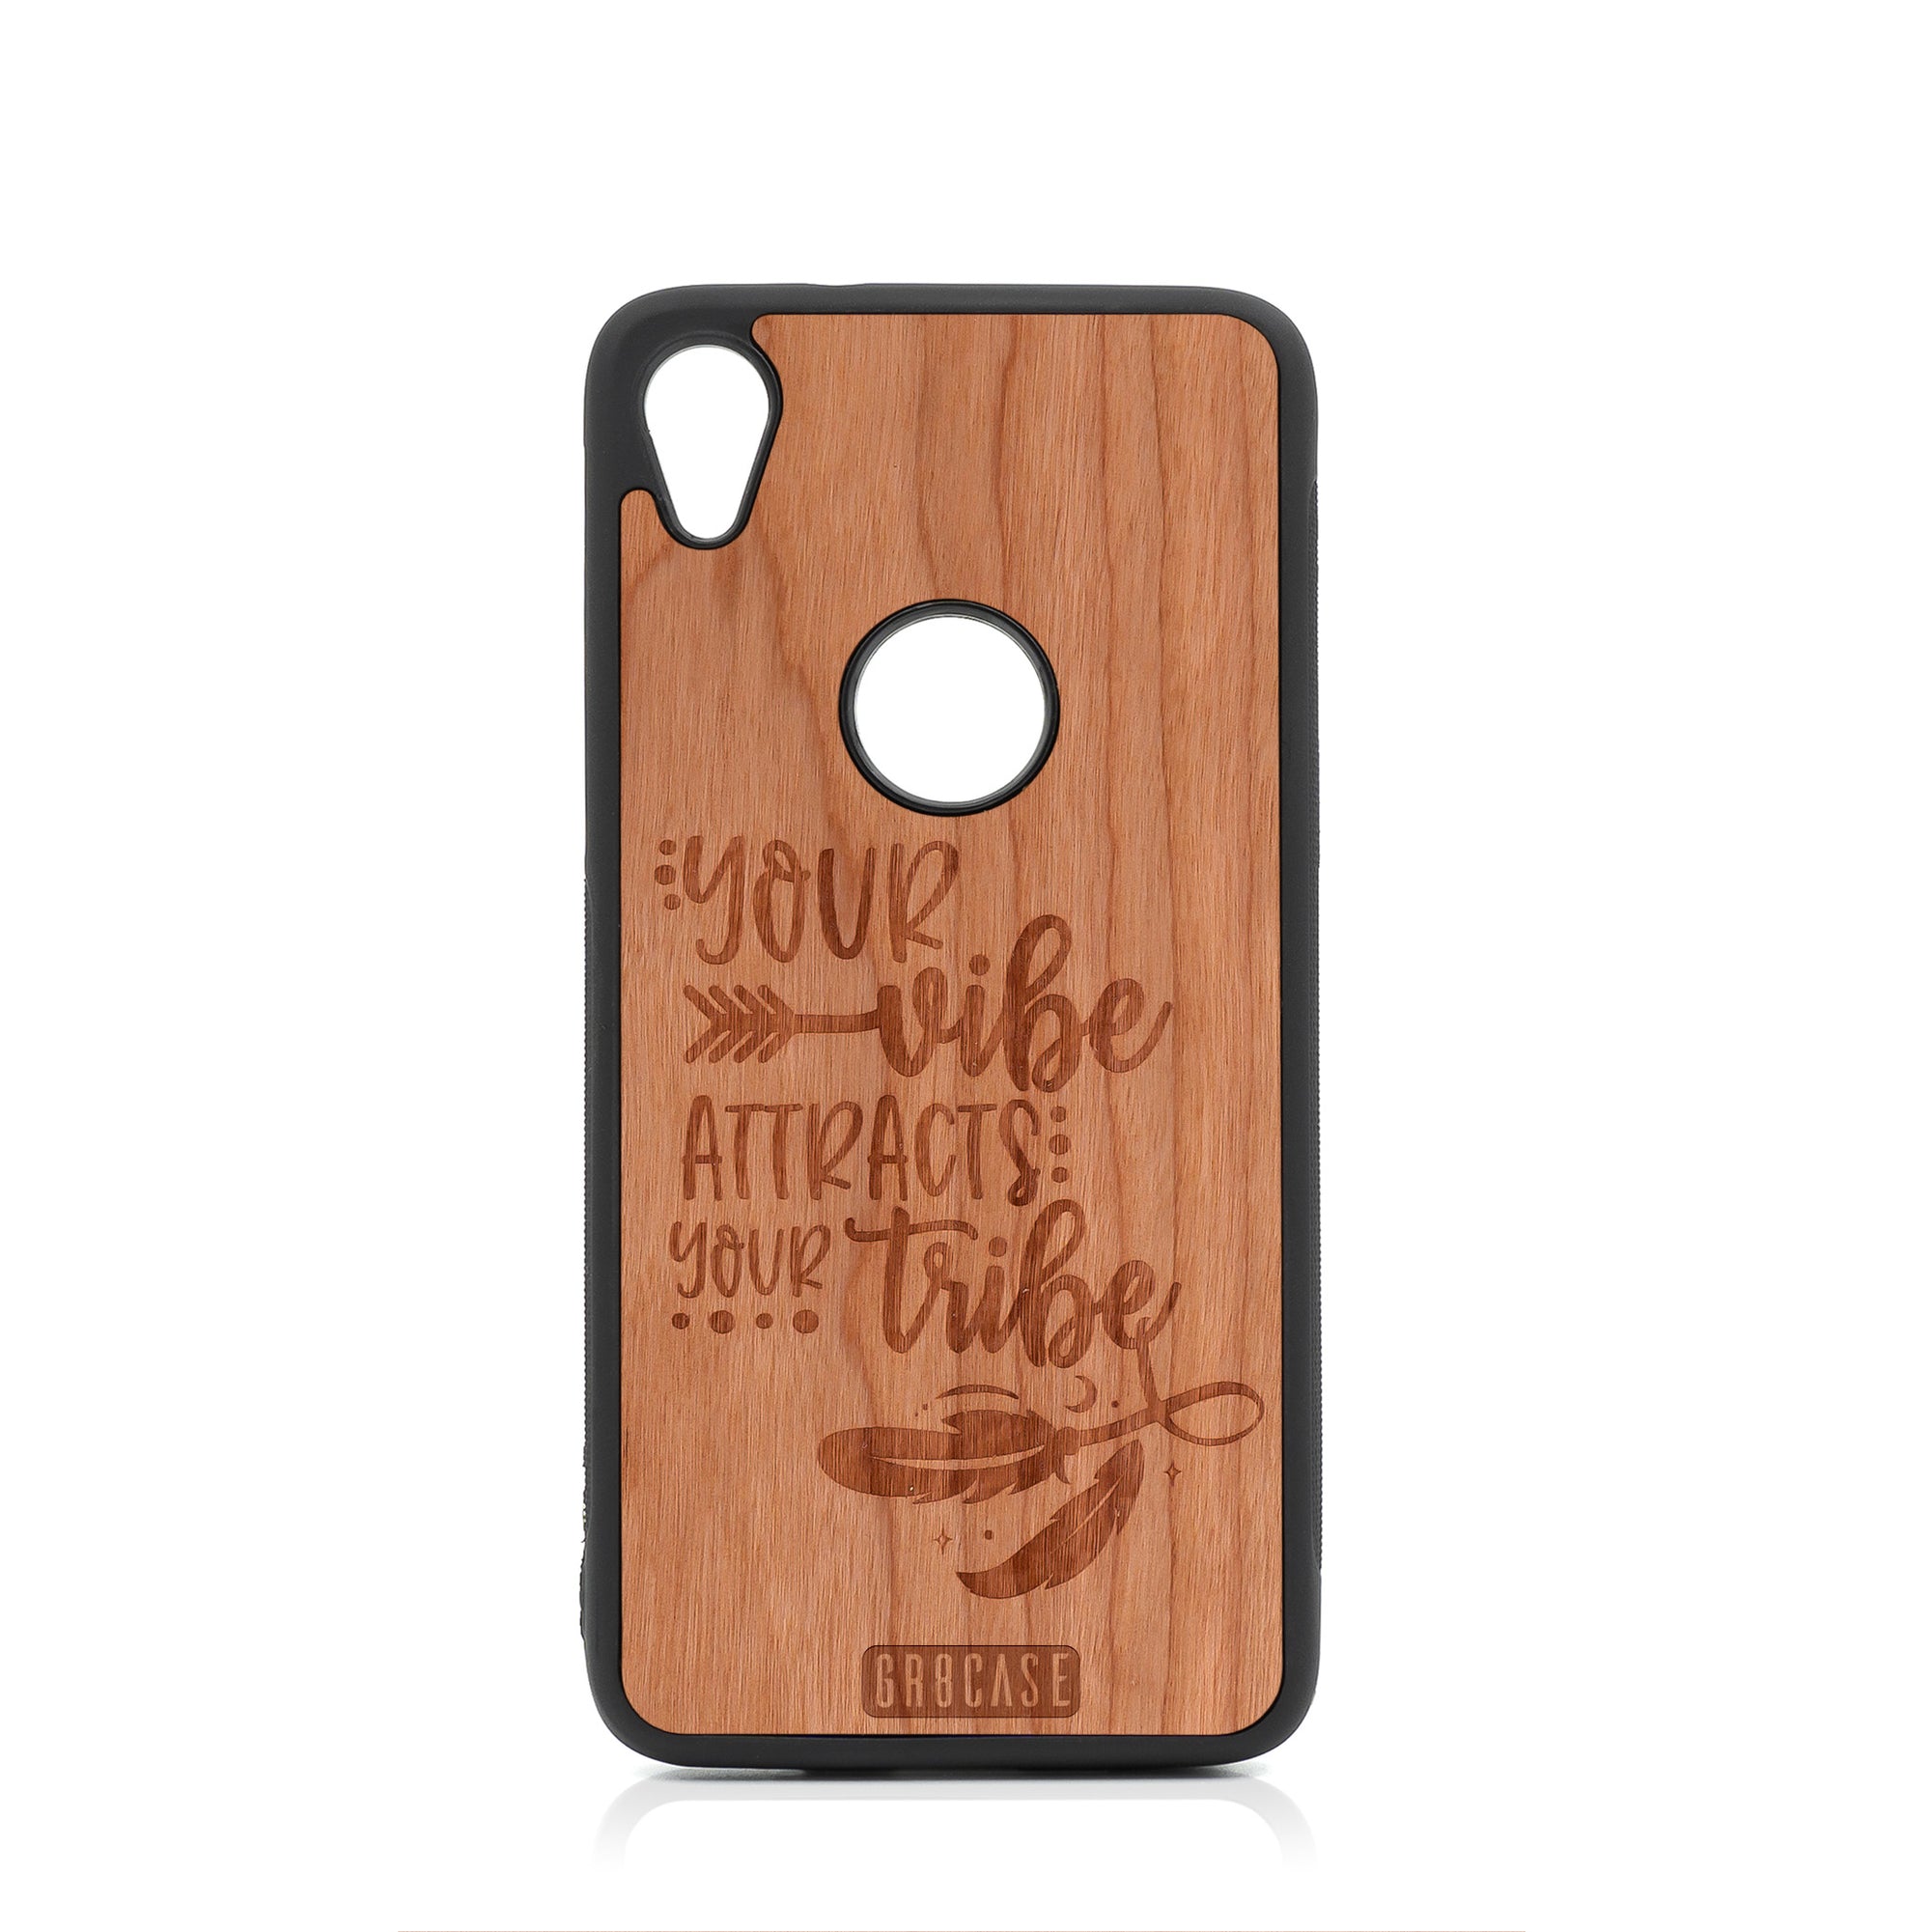 Your Vibe Attracts Your Tribe Design Wood Case For Moto E6